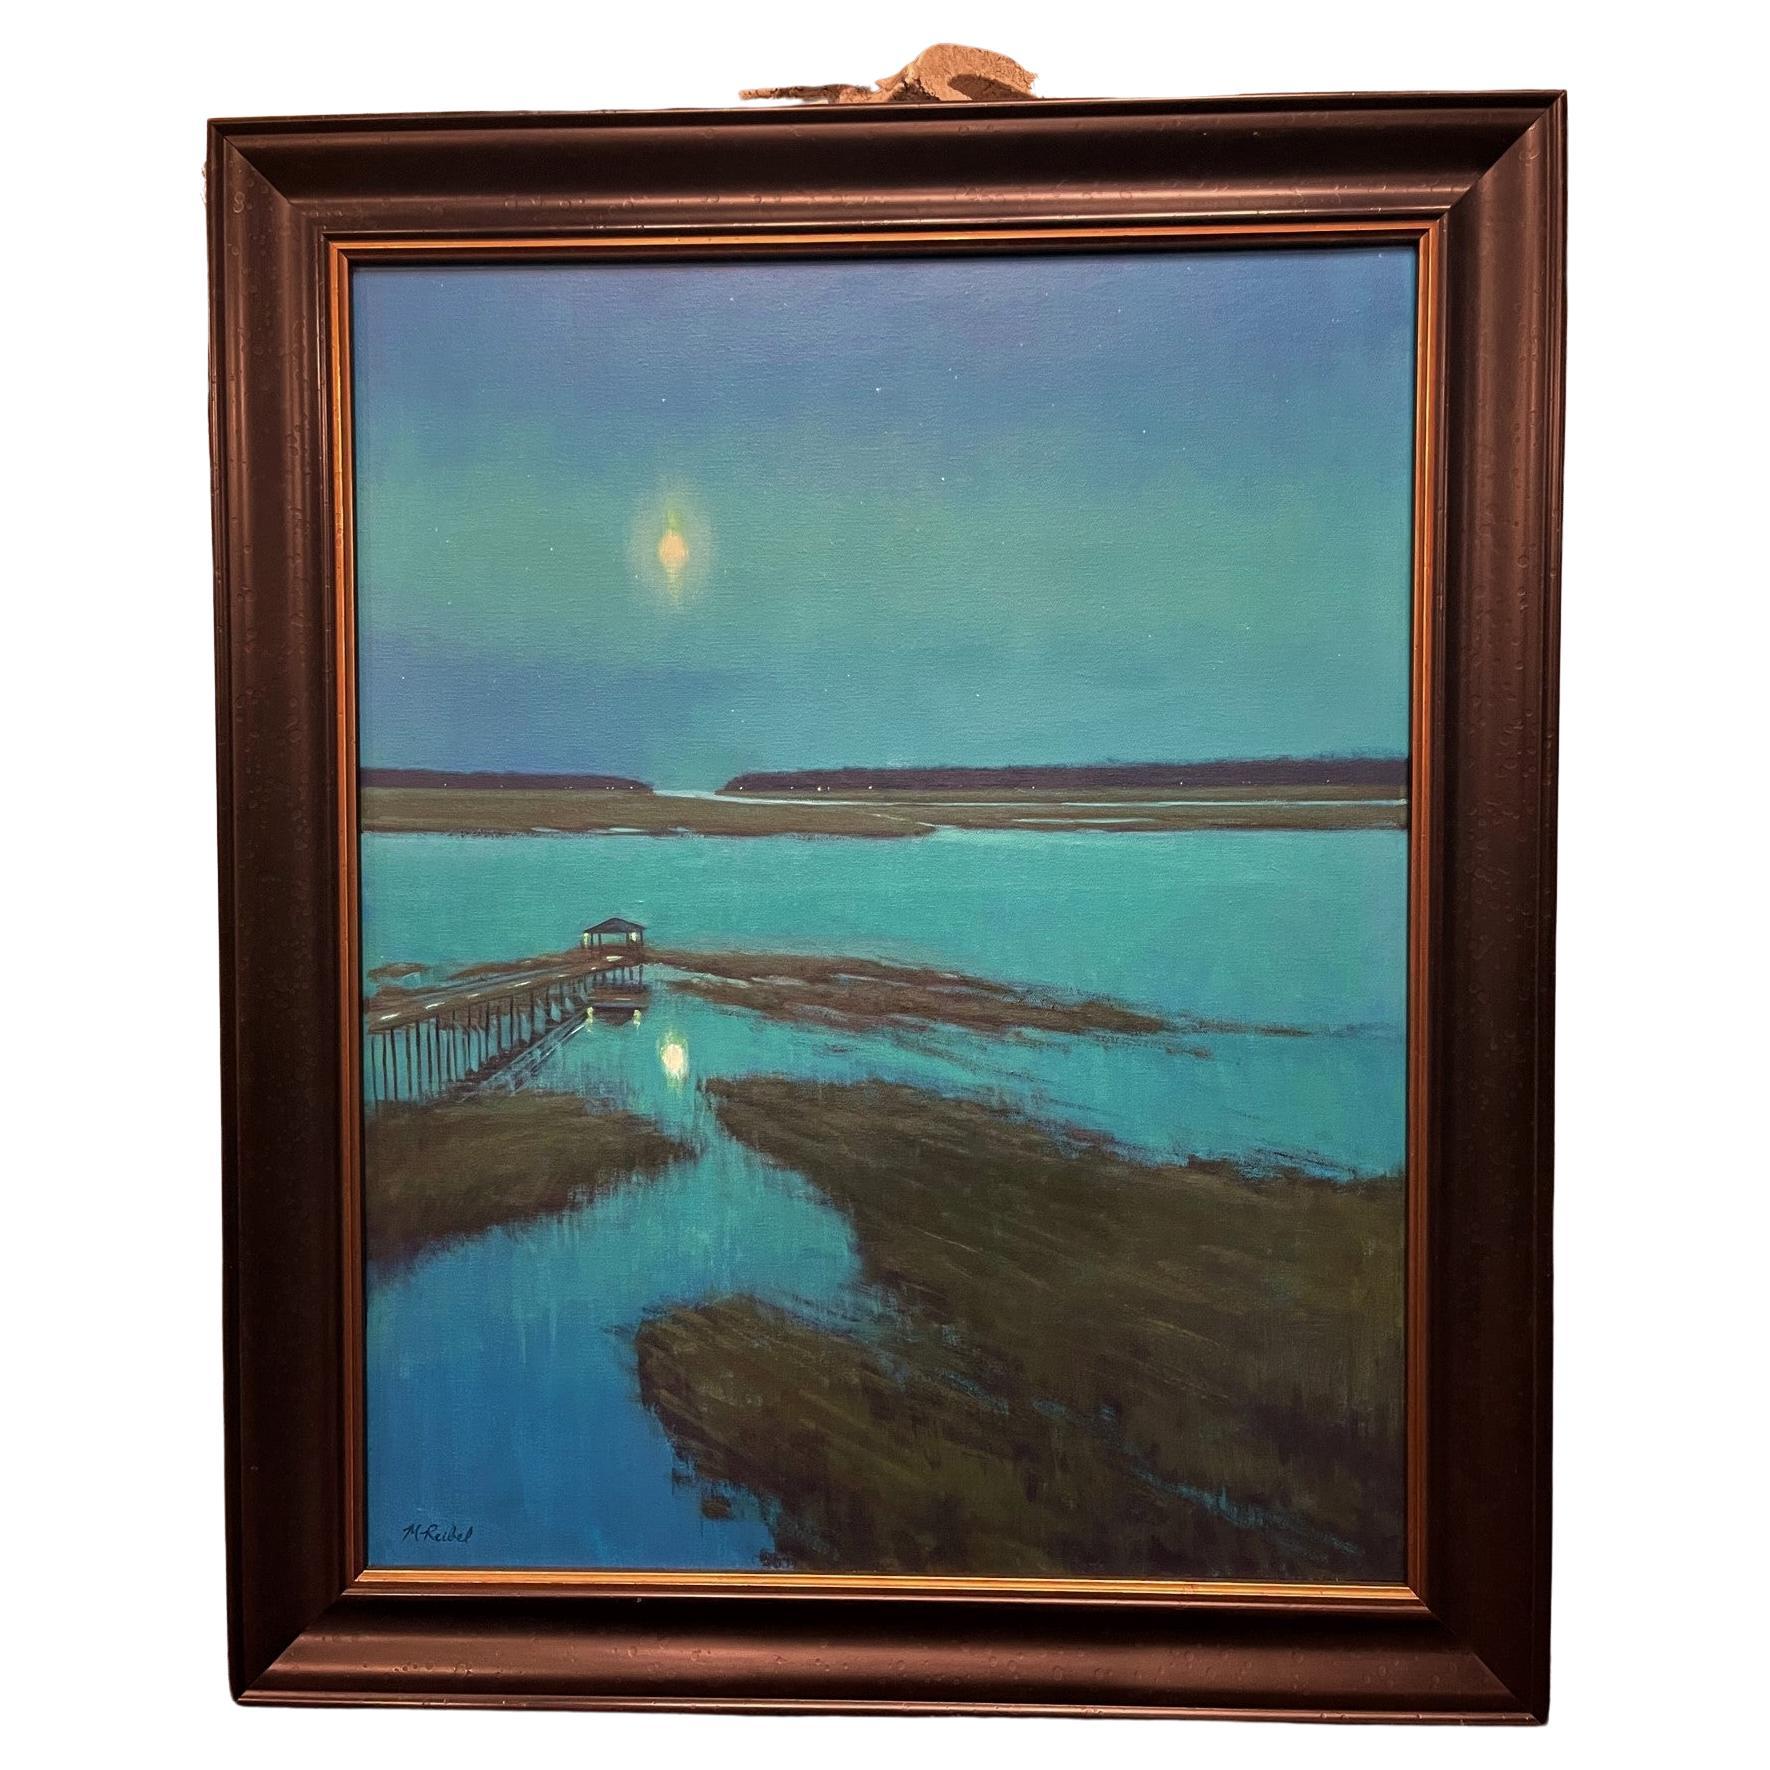 Framed Oil on Canvas "Starry Night in the Low Country", Michael Reibel